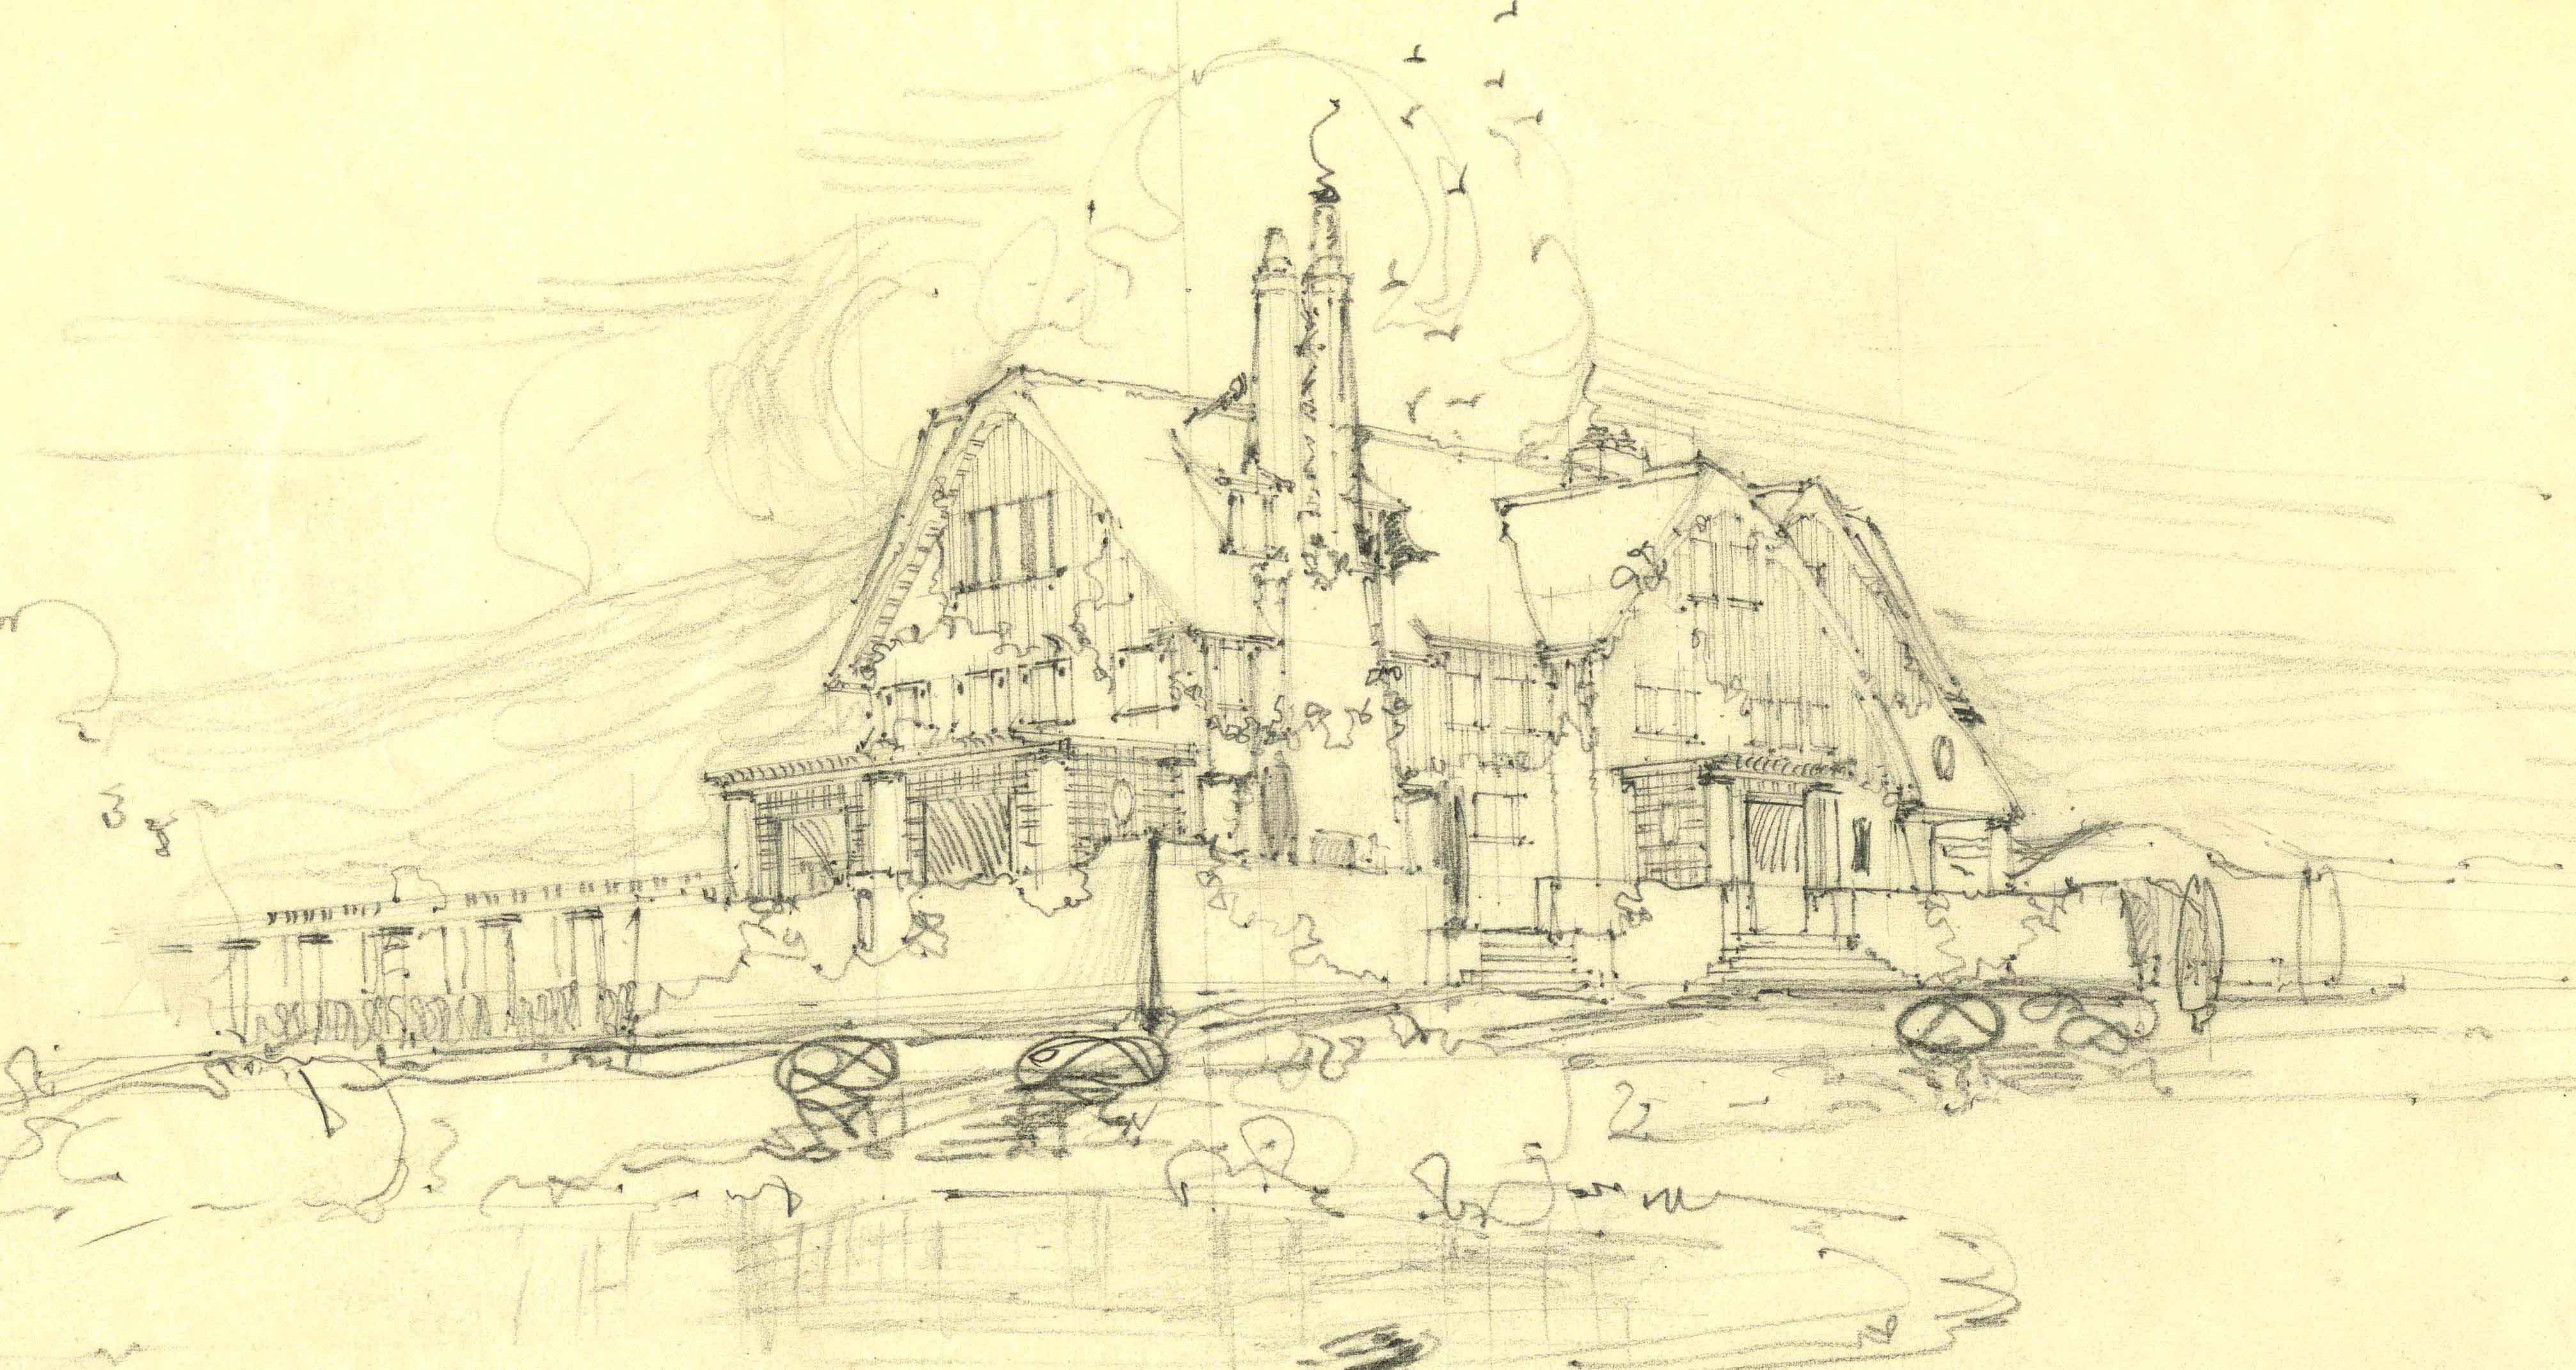 This image is a pencil sketch of a large cottage. From the Goldwin Goldsmith collection.